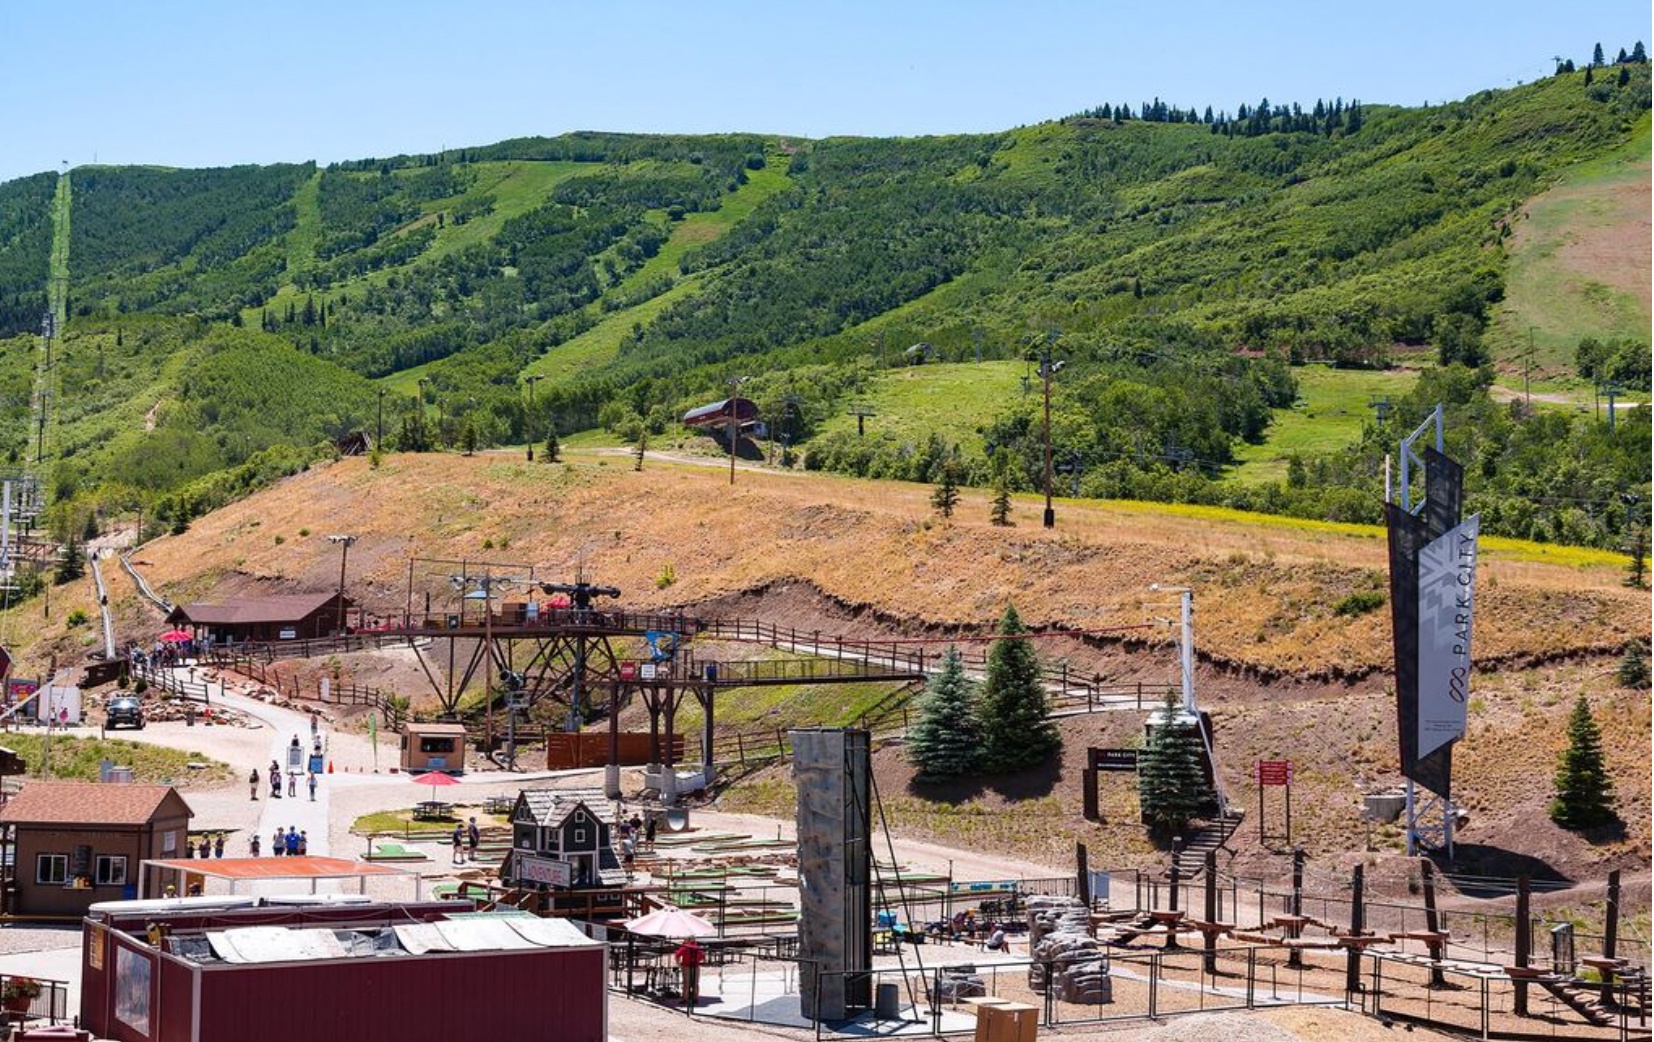 Park City Vacation Rentals, Studio Condo at The Lodge at Mountain Village - In the Summer enjoy hiking around this beautiful area